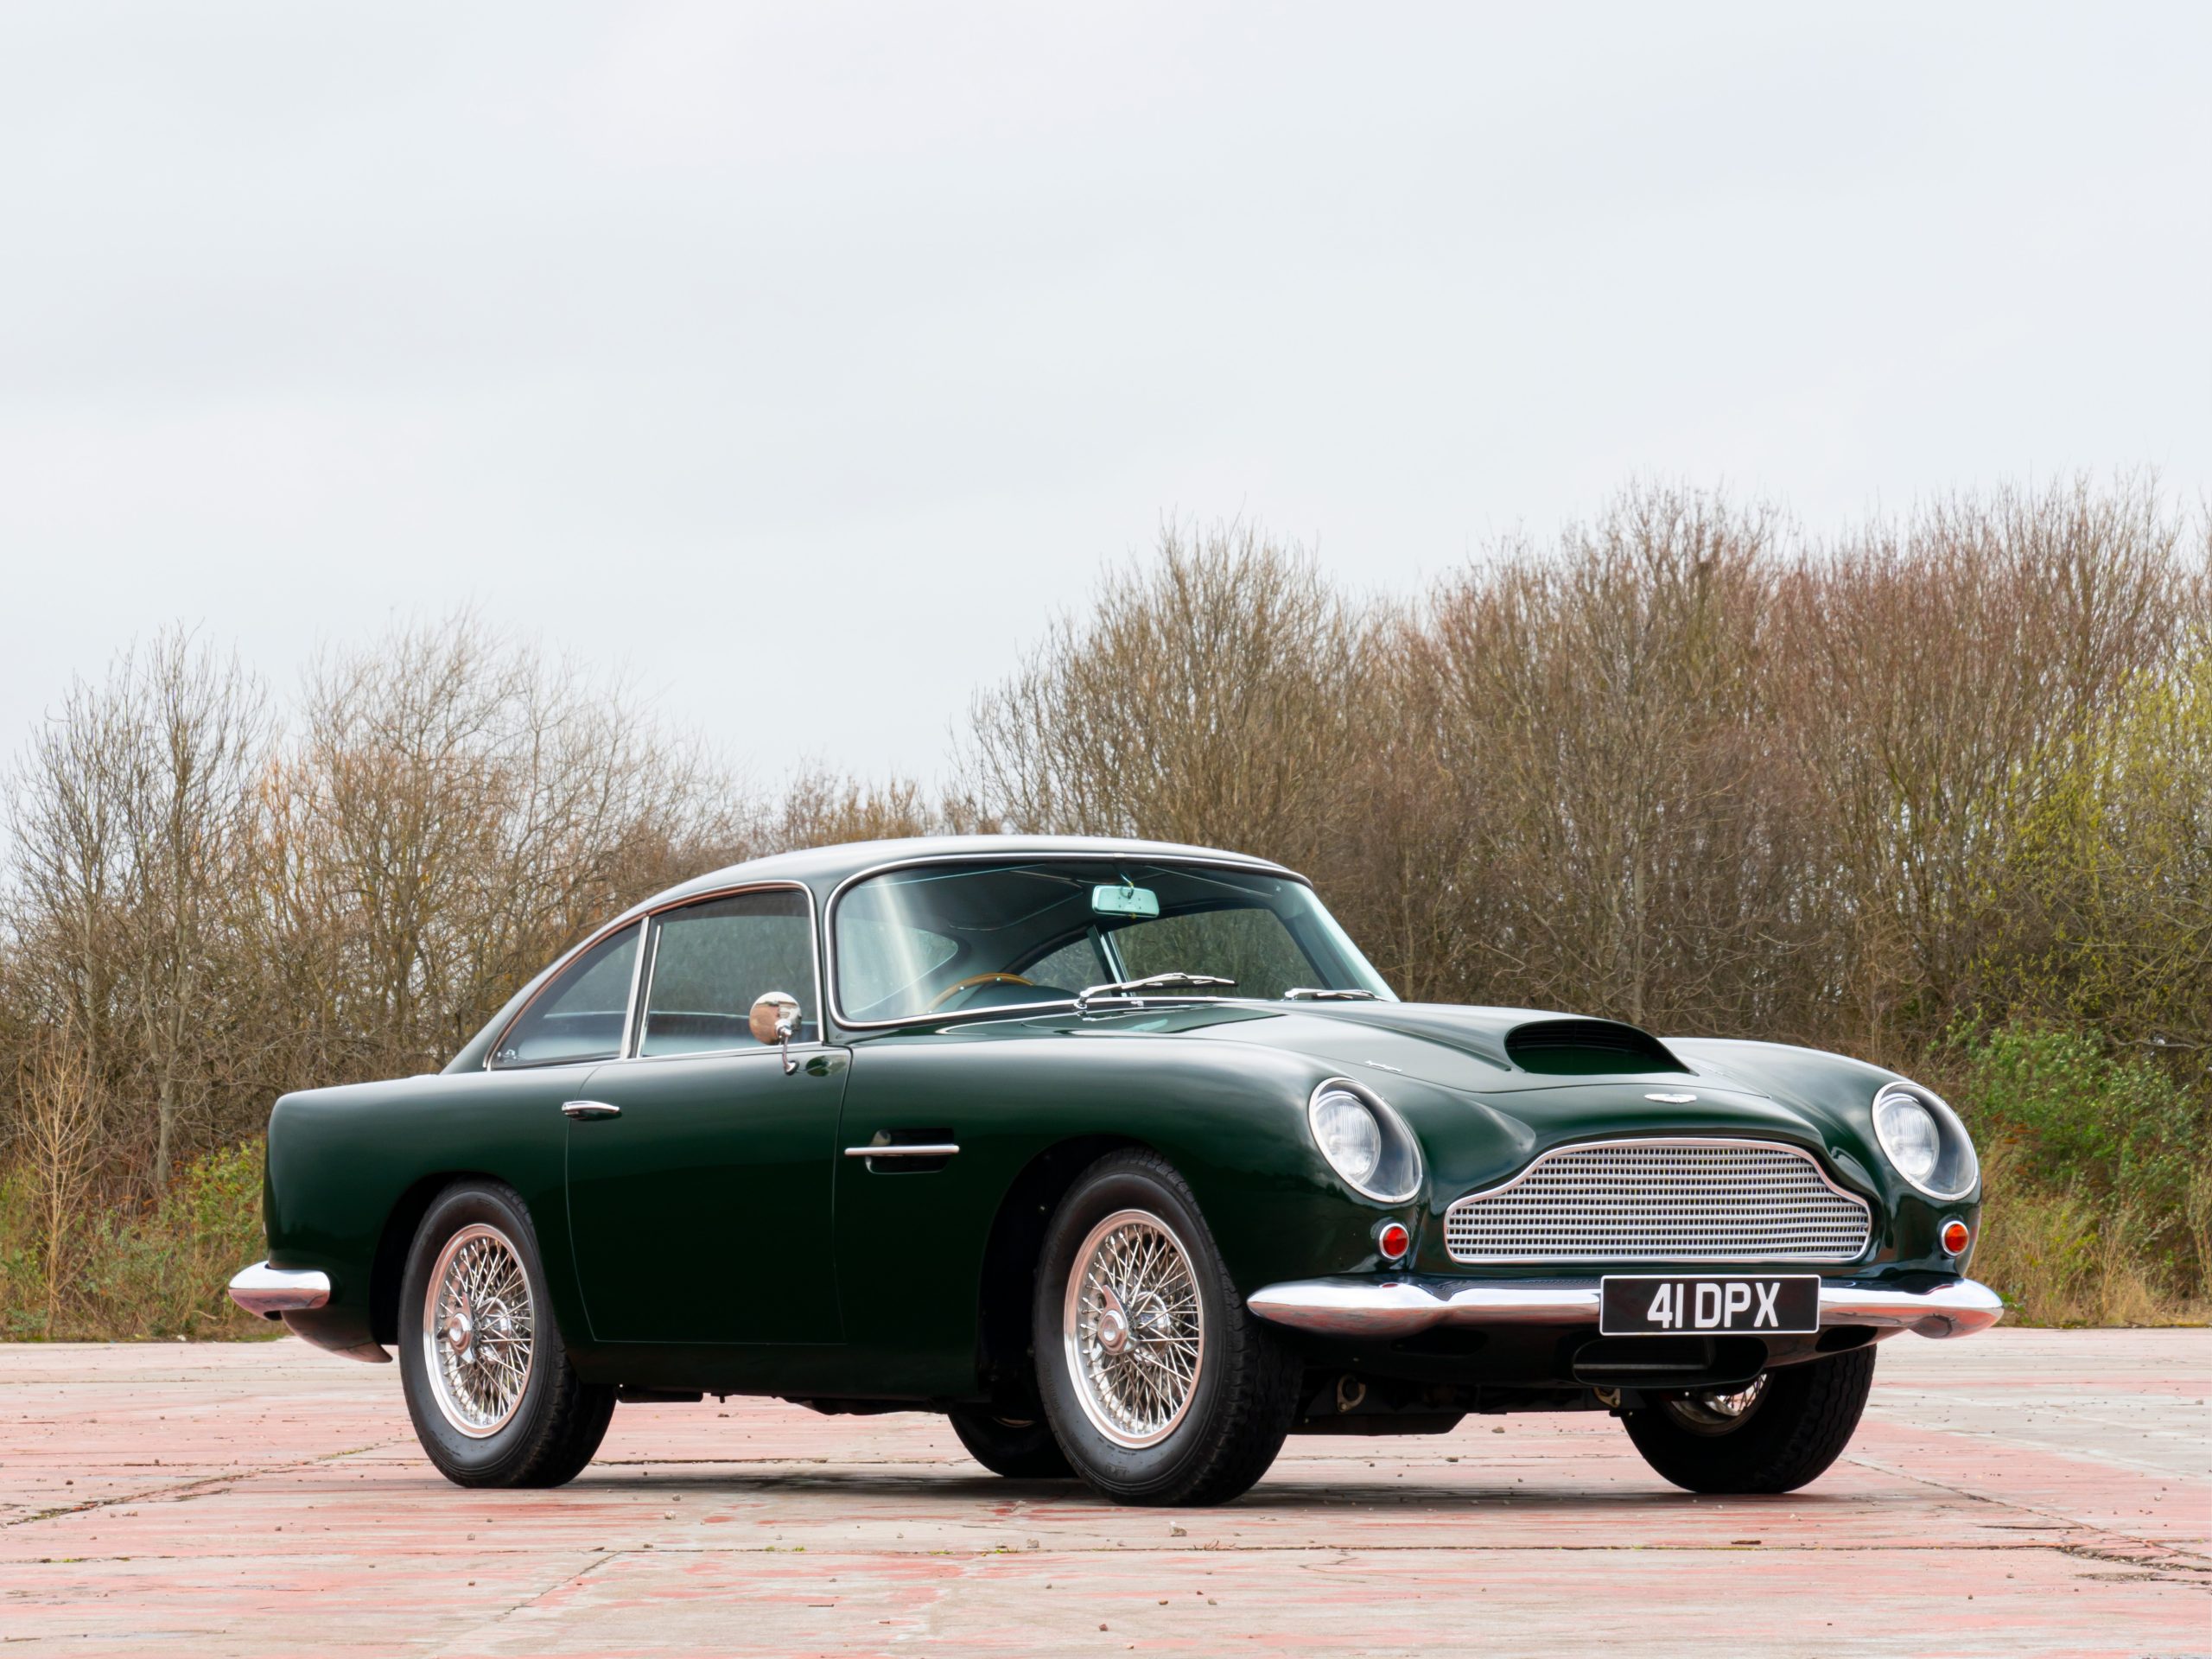 Going, Going, Goon! Peter Sellers' Aston Martin DB4GT heads to auction